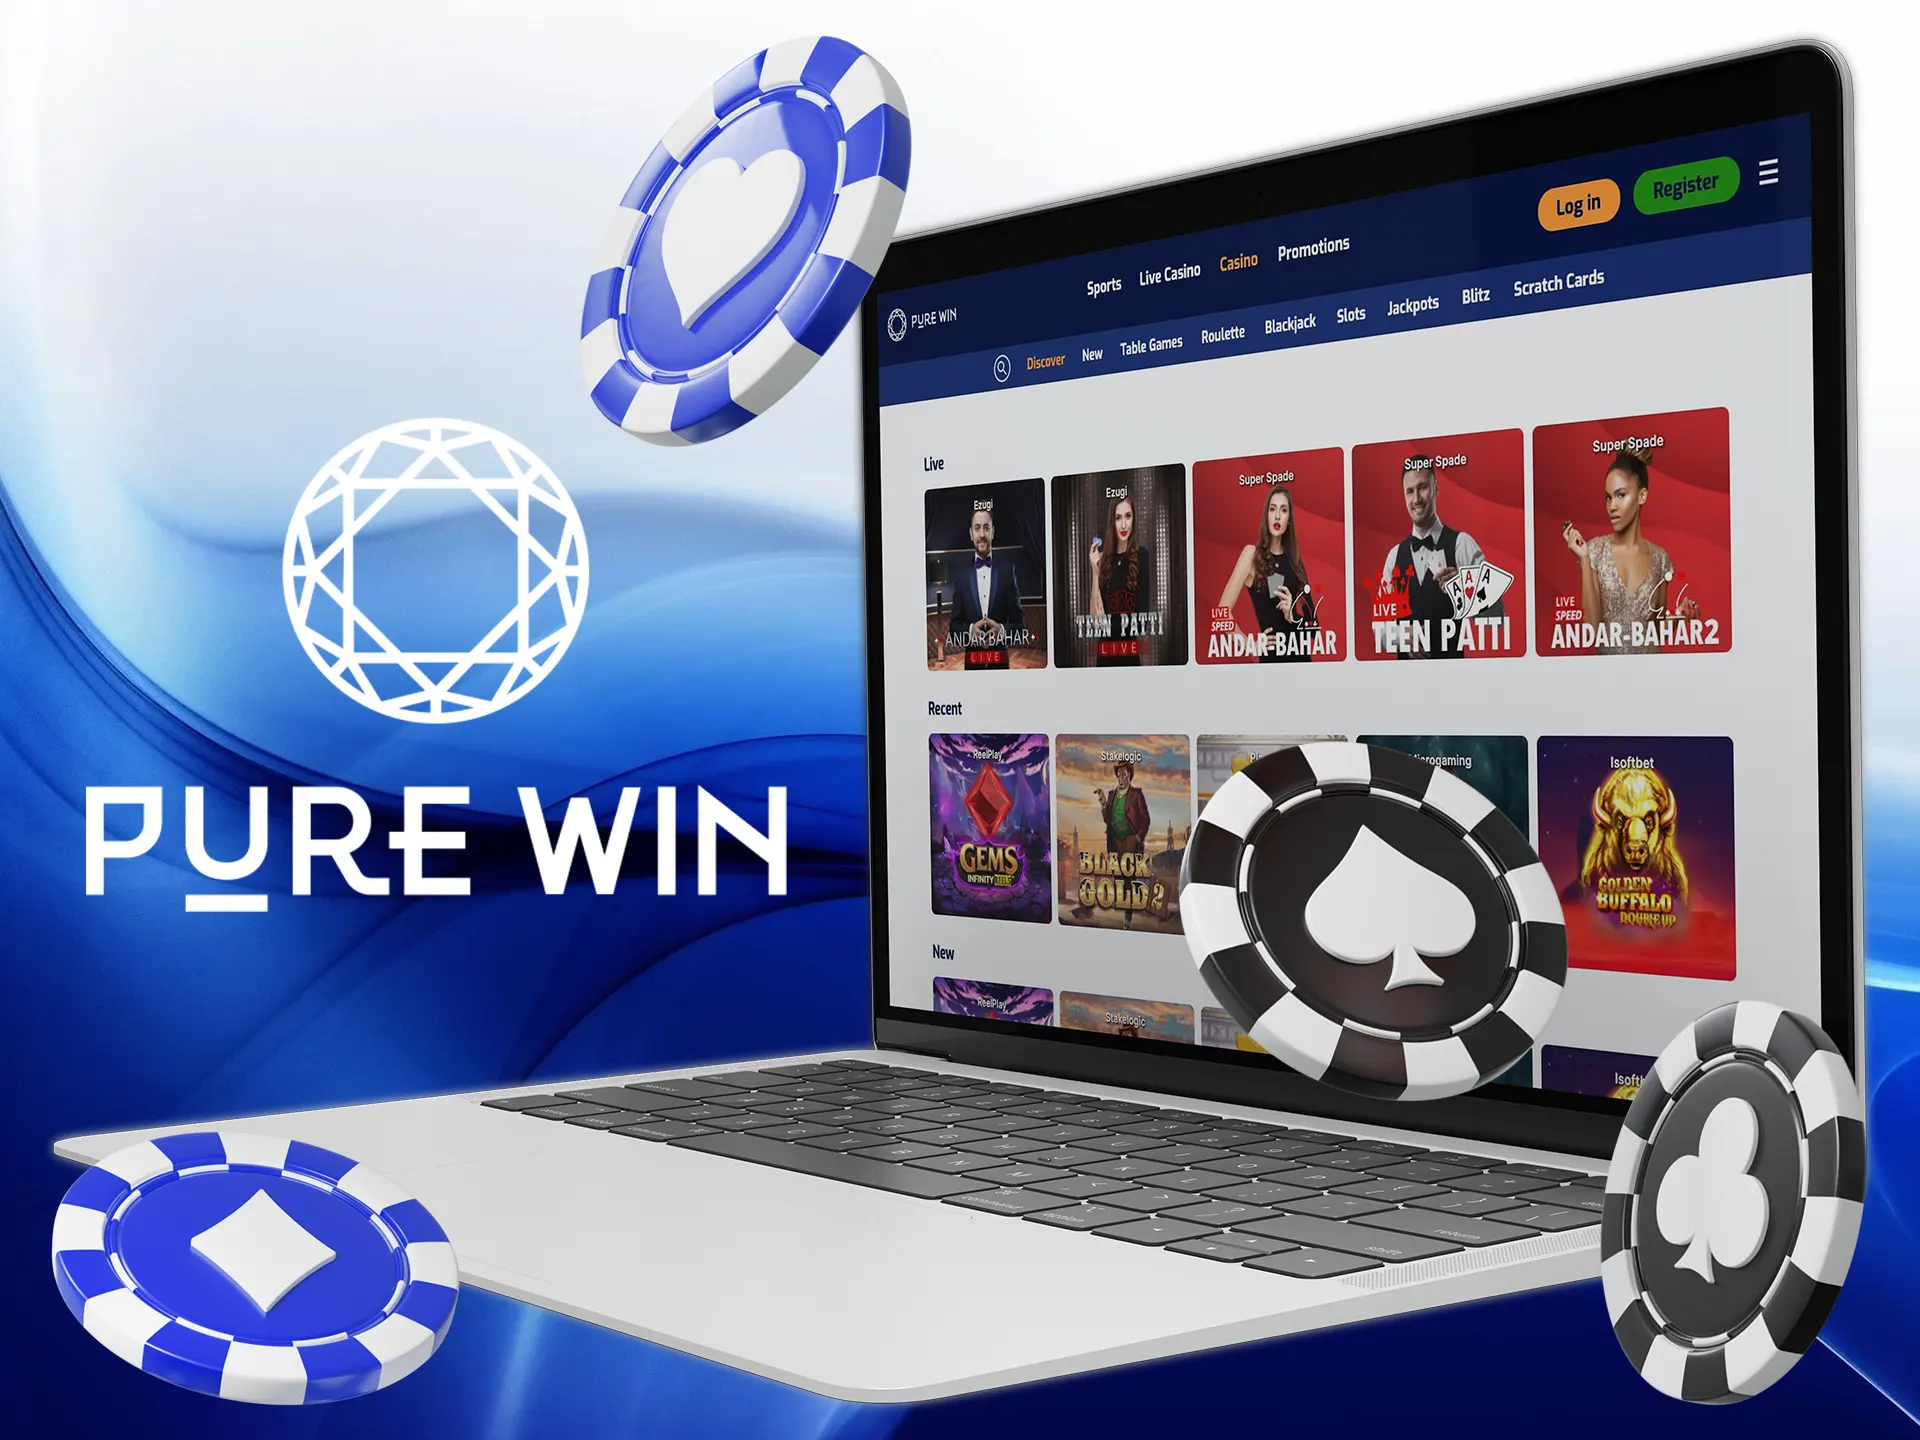 Have joy by playing casino games at the Pure Win.